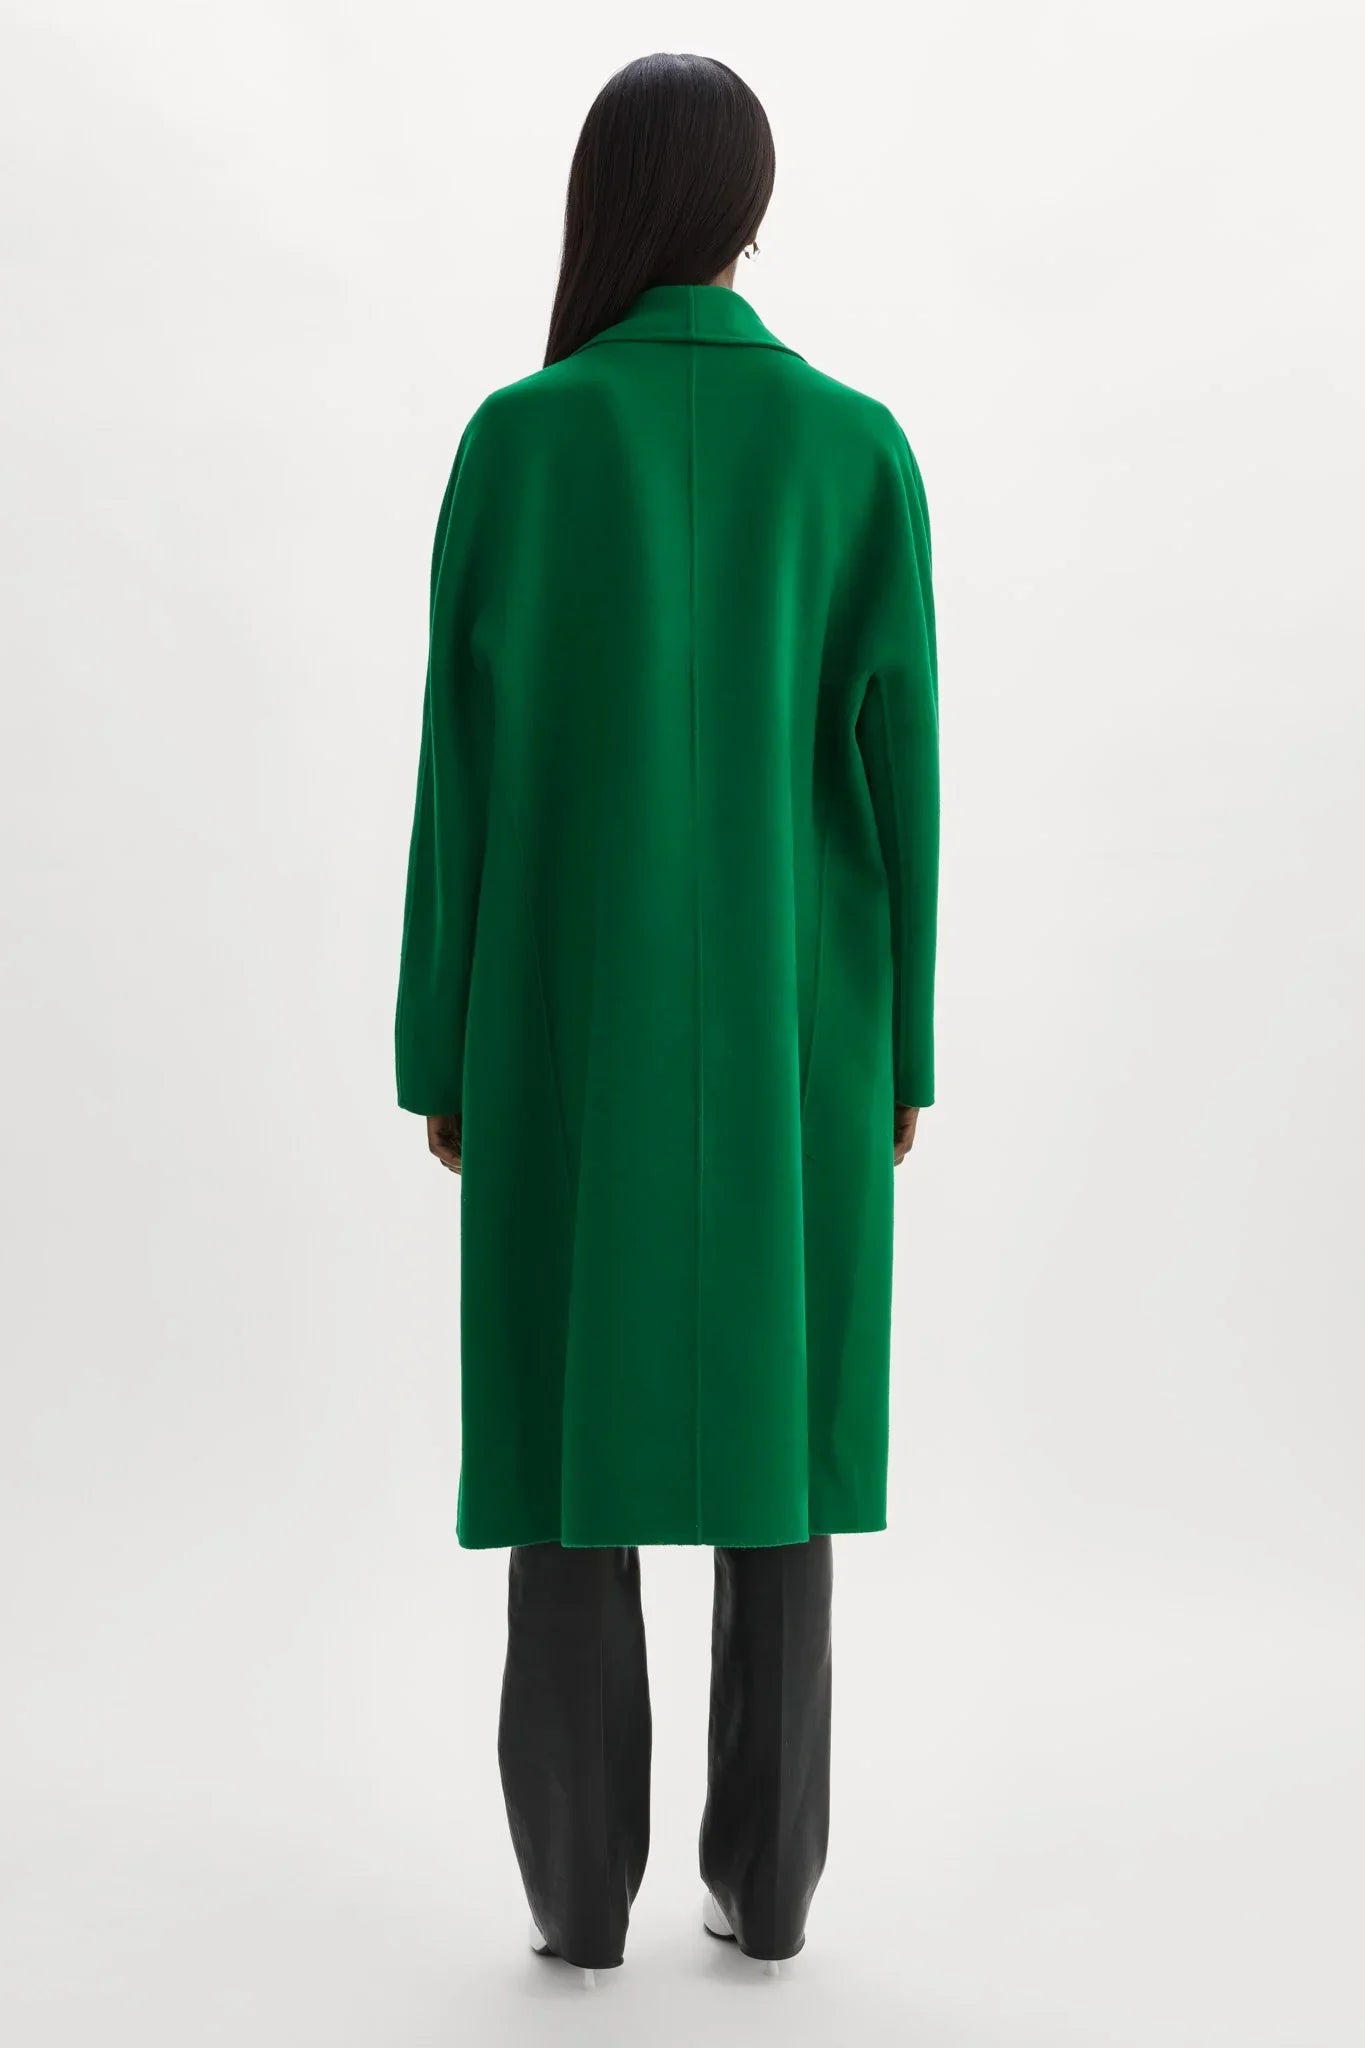 Lamarque Thara Double Faced Wool Coat - Vibrant Green